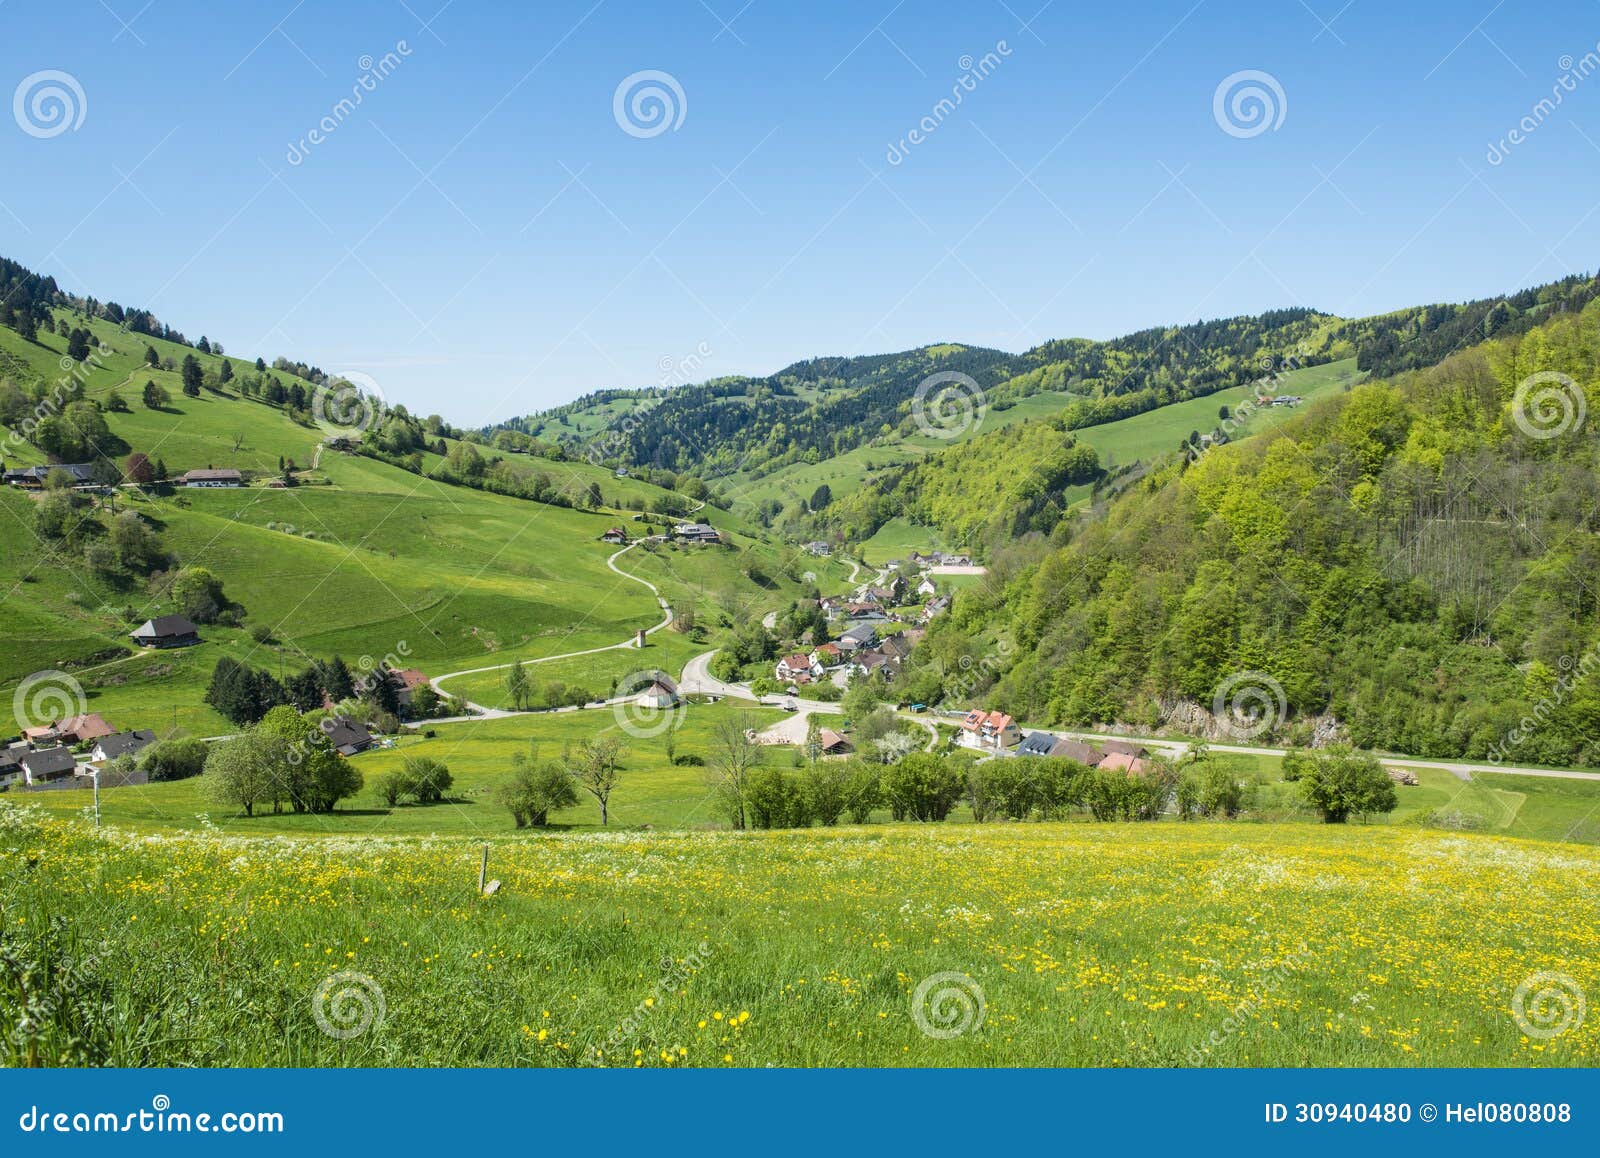 landscape black forest, germany. beautiful flowering meadows, hills with trees, windy road, village, schwarzwald